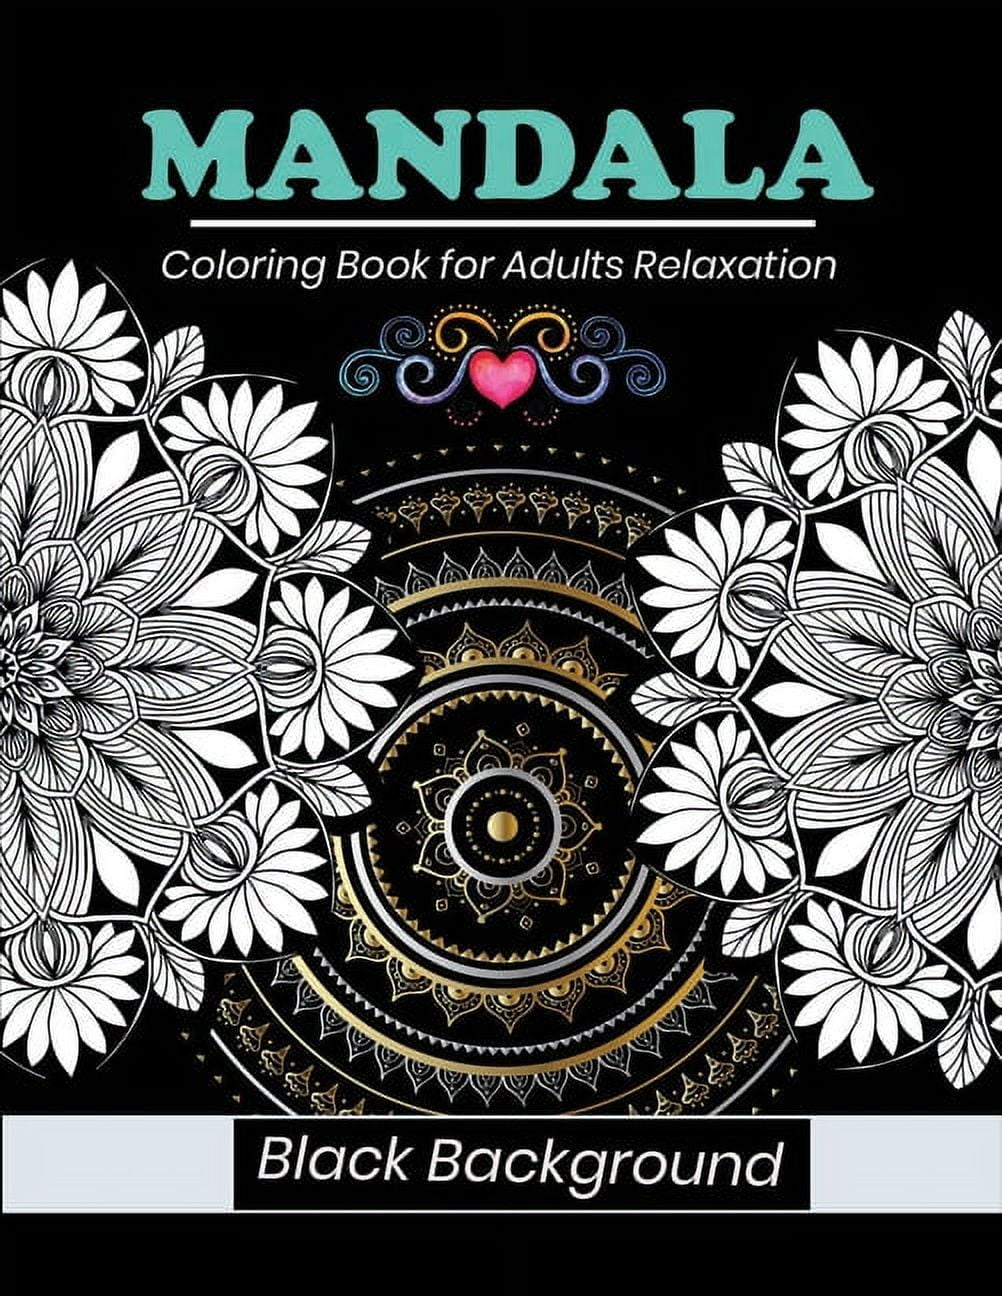 Mandala Coloring Book for Adults Relaxation Black Background: 50 Coloring Page Black Background [Book]